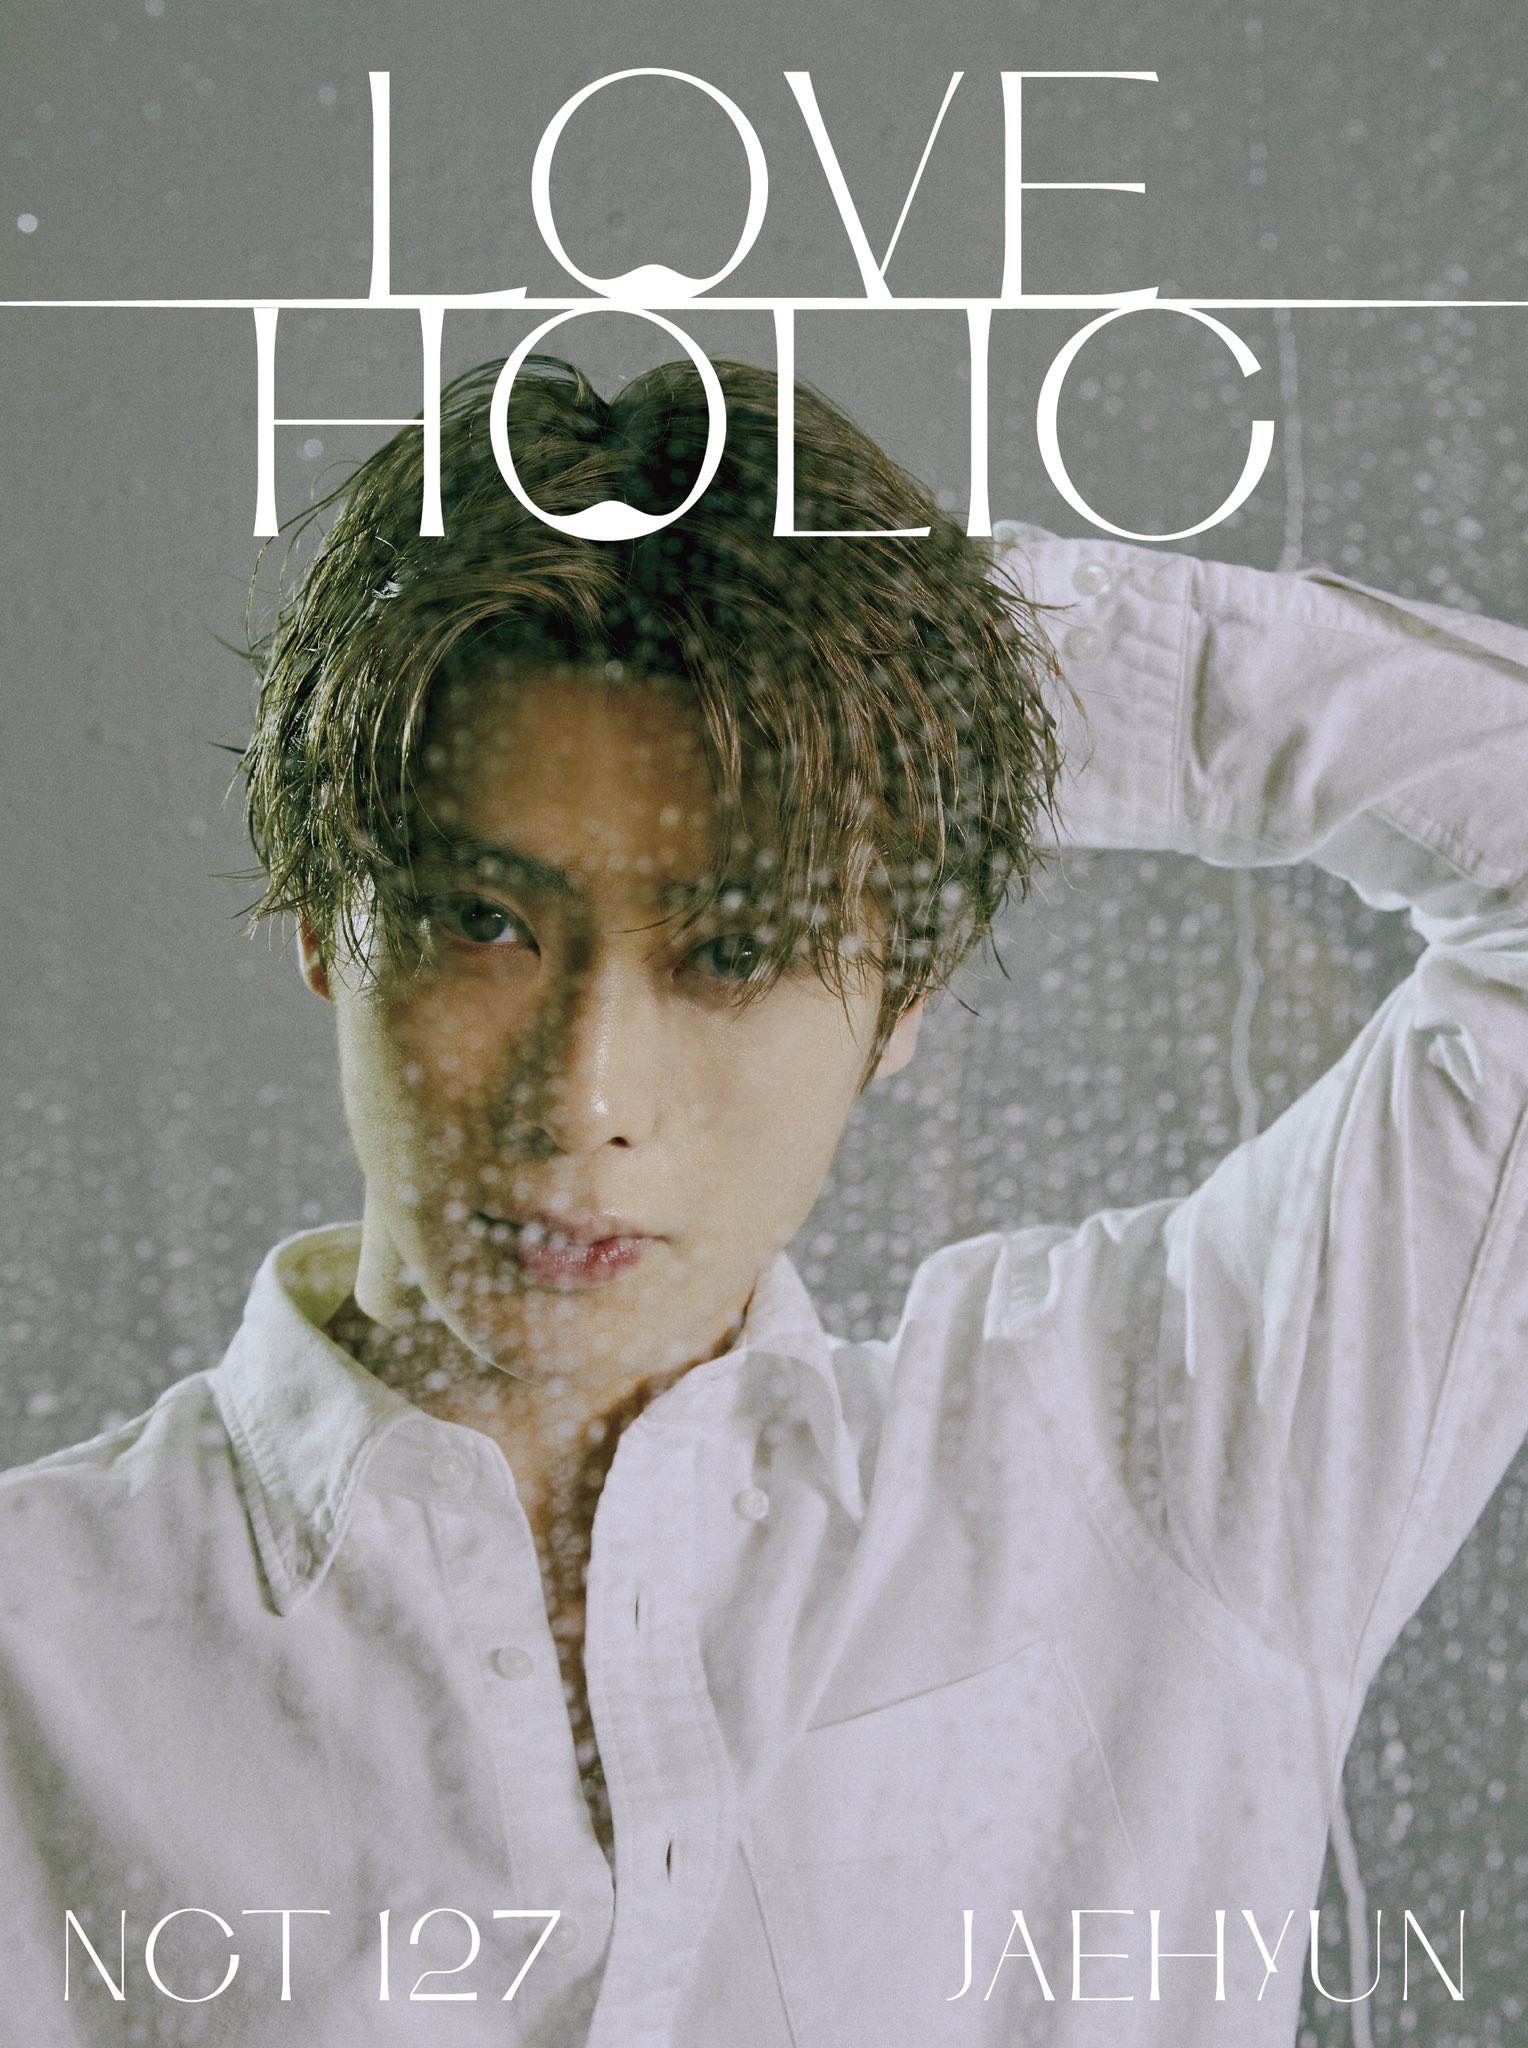 Nct 127 Members Profile Updated